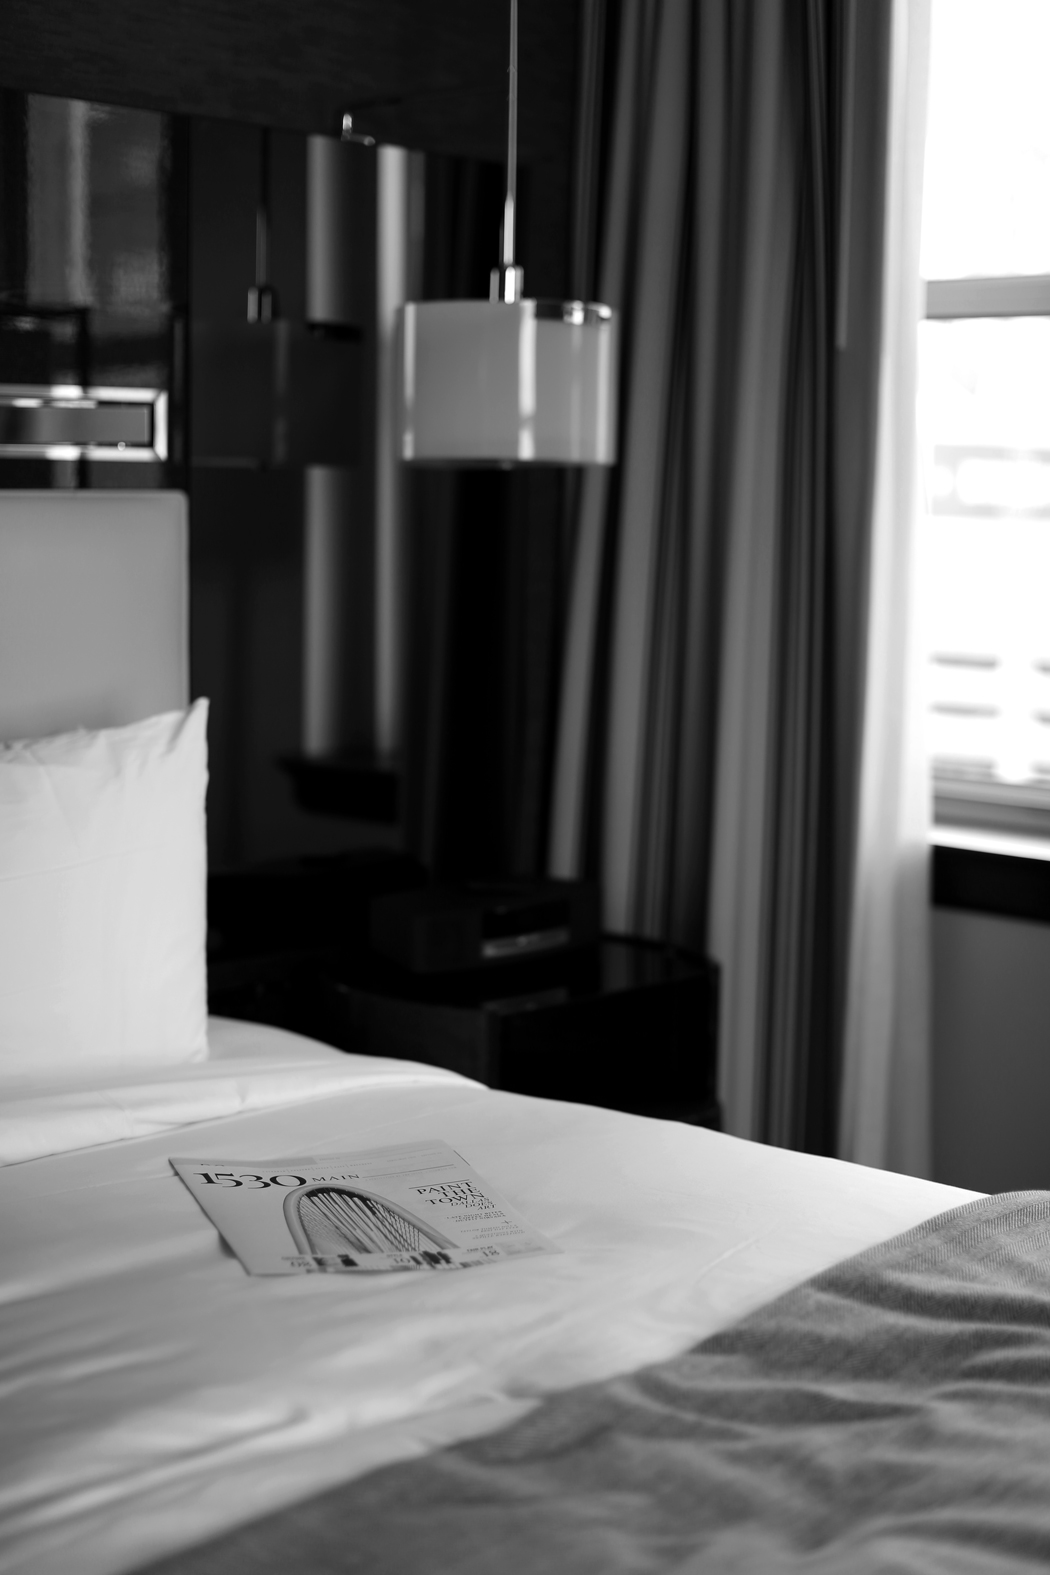 The Dashing Rider The Joule Hotel Dallas, Texas Review